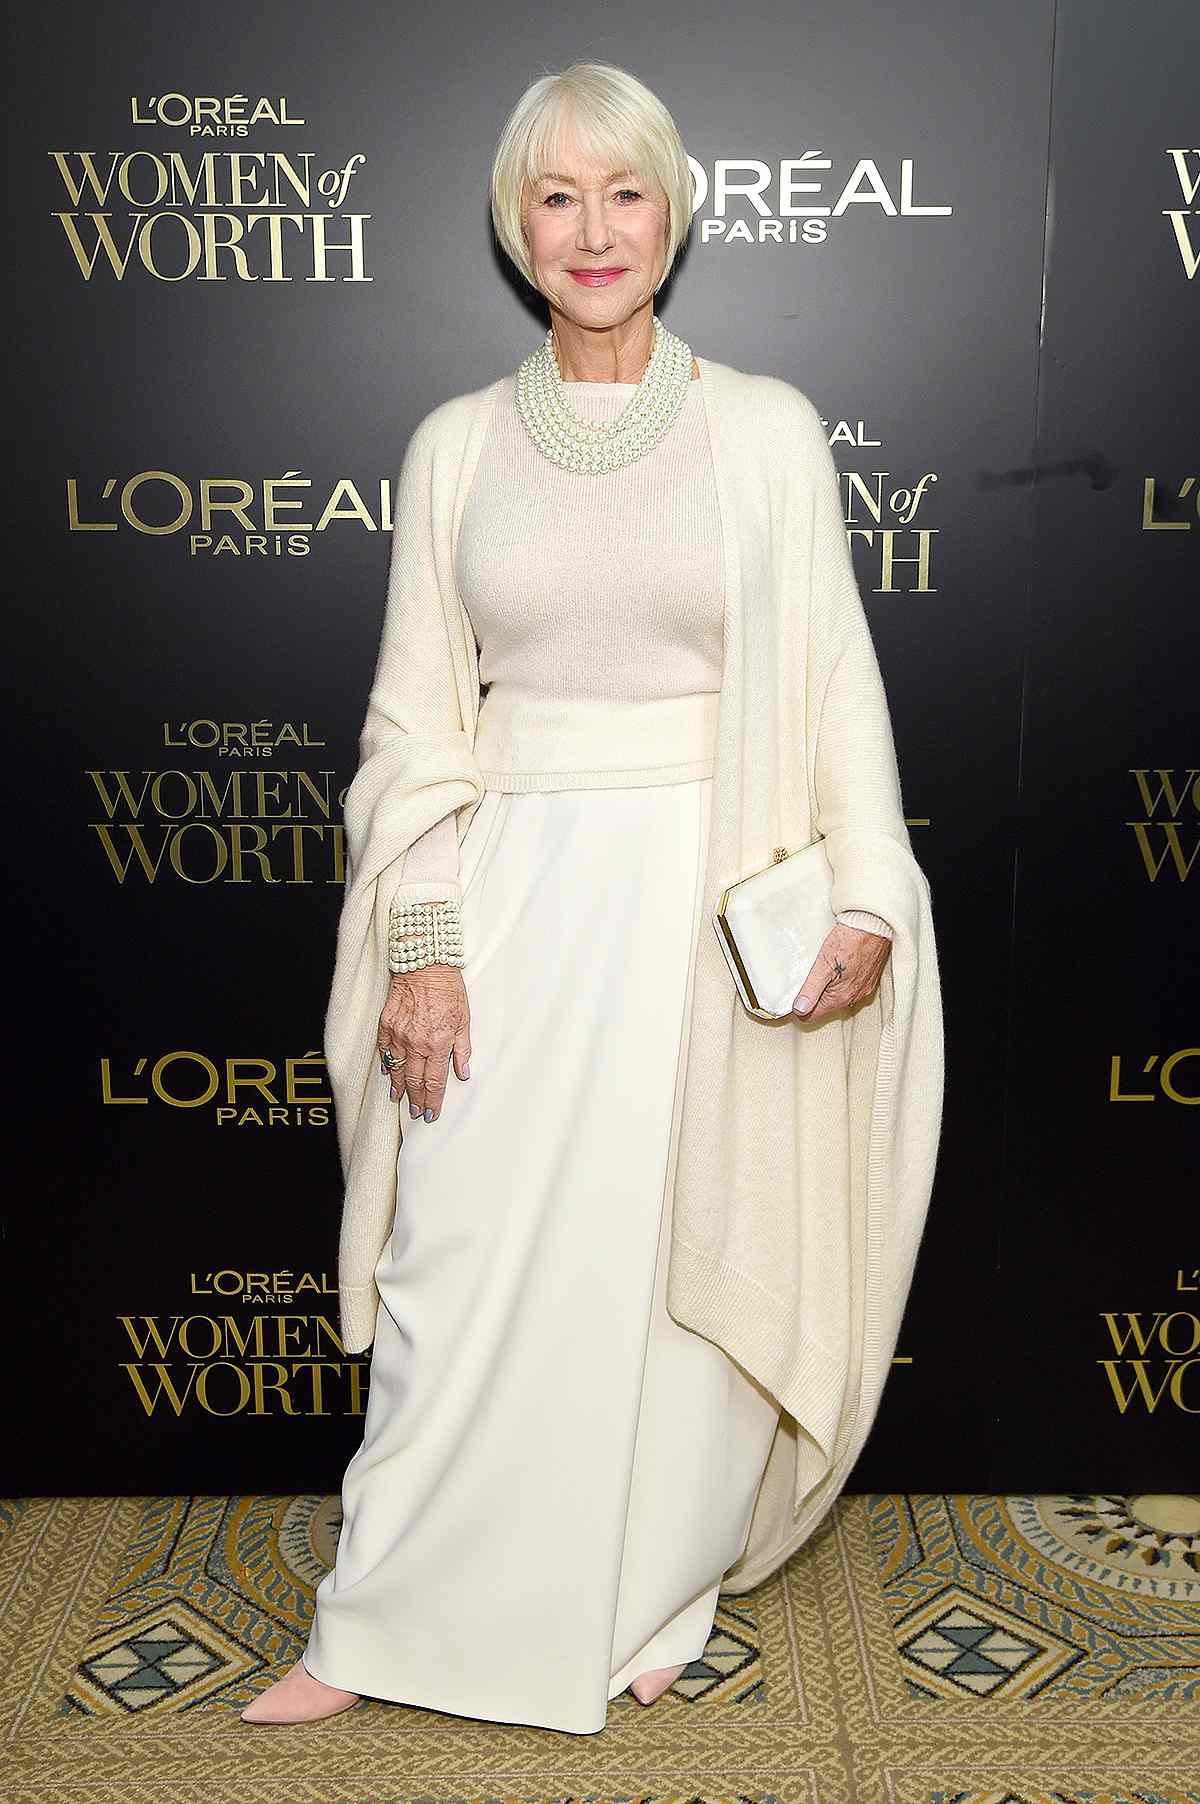 NEW YORK, NEW YORK - DECEMBER 04: Dame Helen Mirren attends the 14th Annual L'Oreal Paris Women Of Worth Awards at The Pierre on December 04, 2019 in New York City.